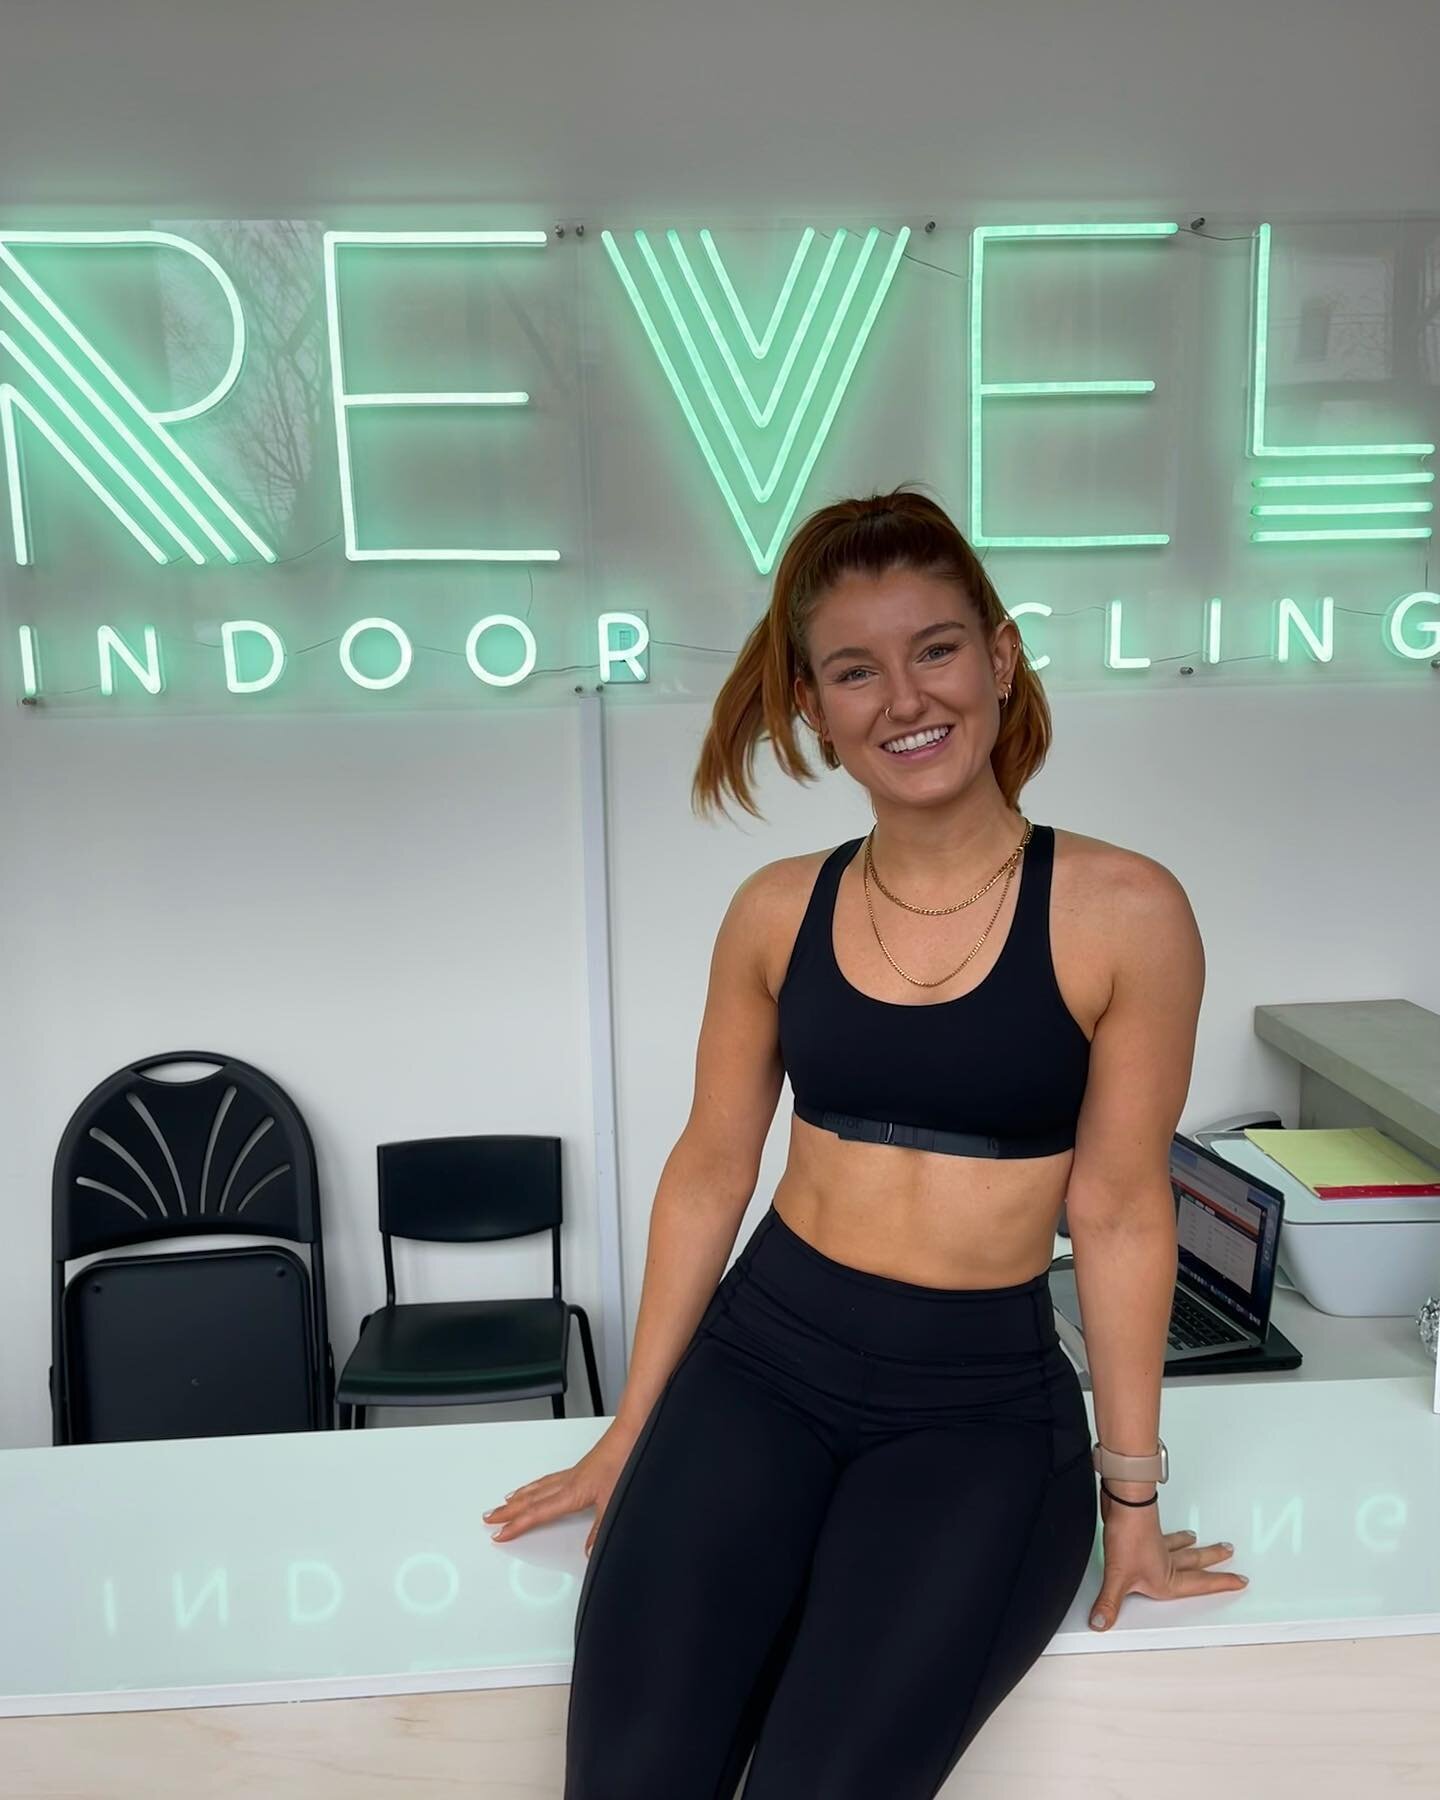 New instructor alert‼️Meet Grace! She is the newest addition to the Revel team and we are absolutely elated 🎉🎉She has been putting in work during training and now she&rsquo;s is ready to take the stage by storm⚡️

Sign up for her first FREE communi